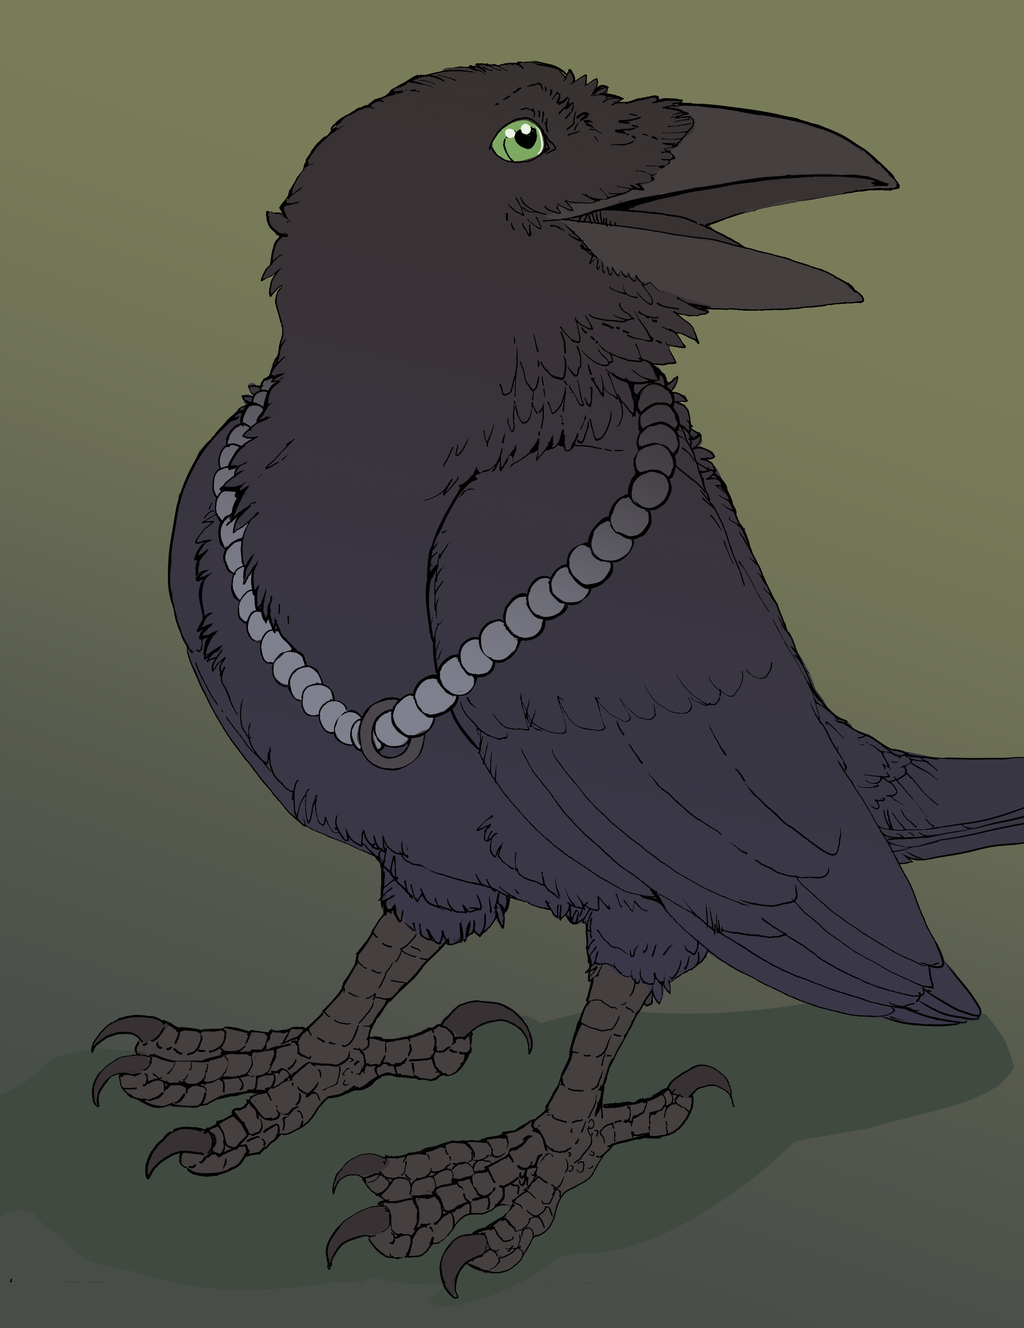 [Personal]-A Crow